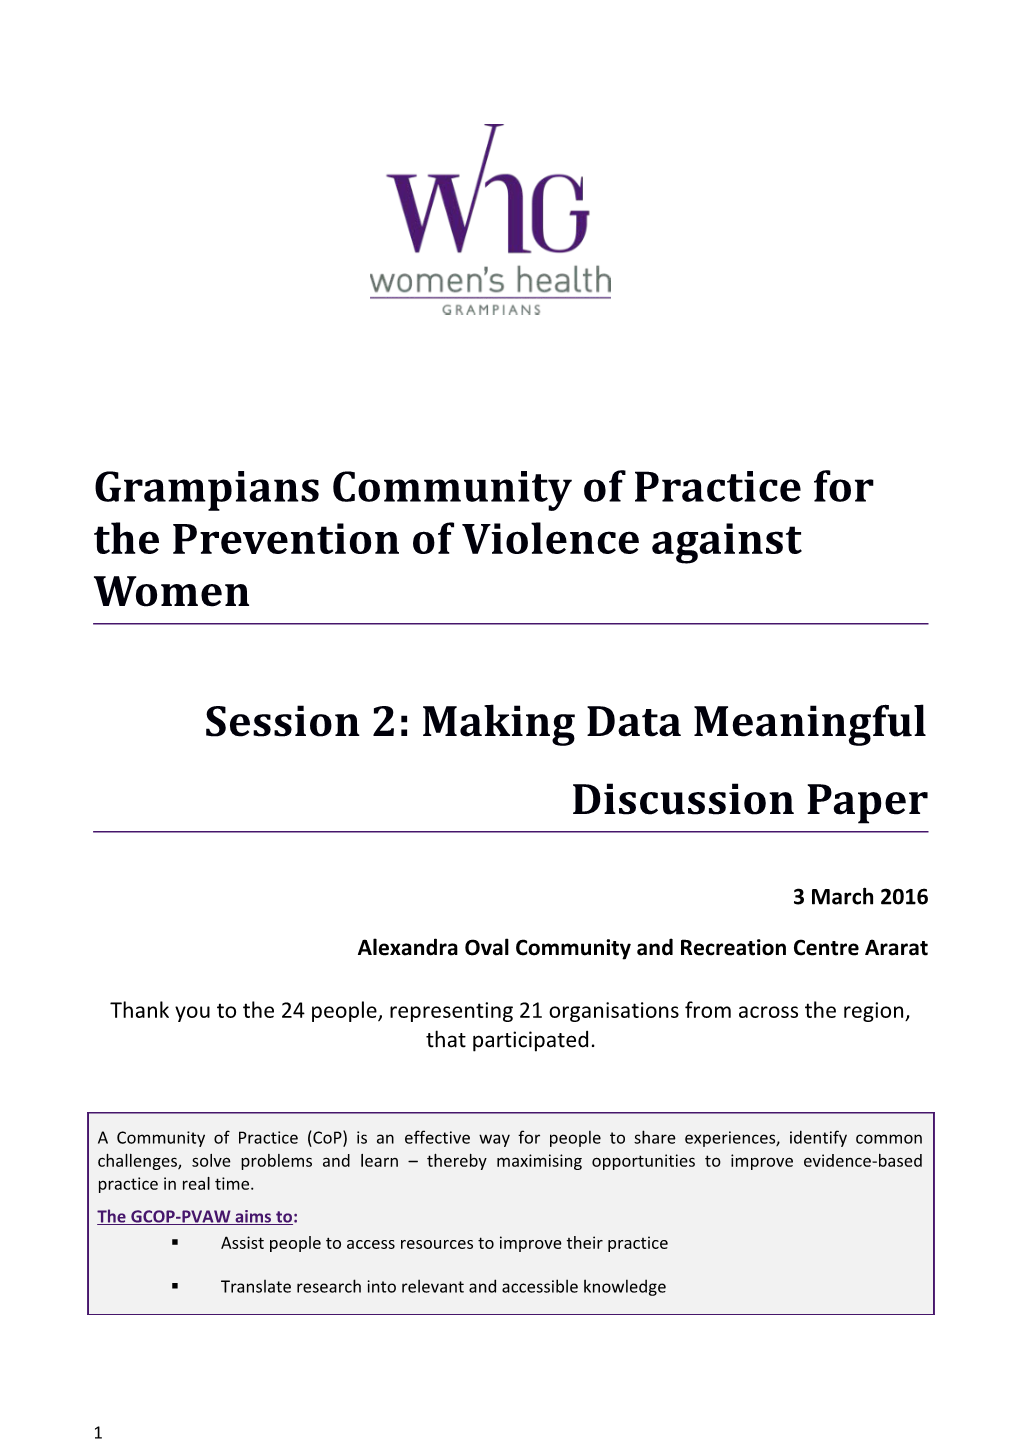 Grampians Community of Practice for the Prevention of Violence Against Women